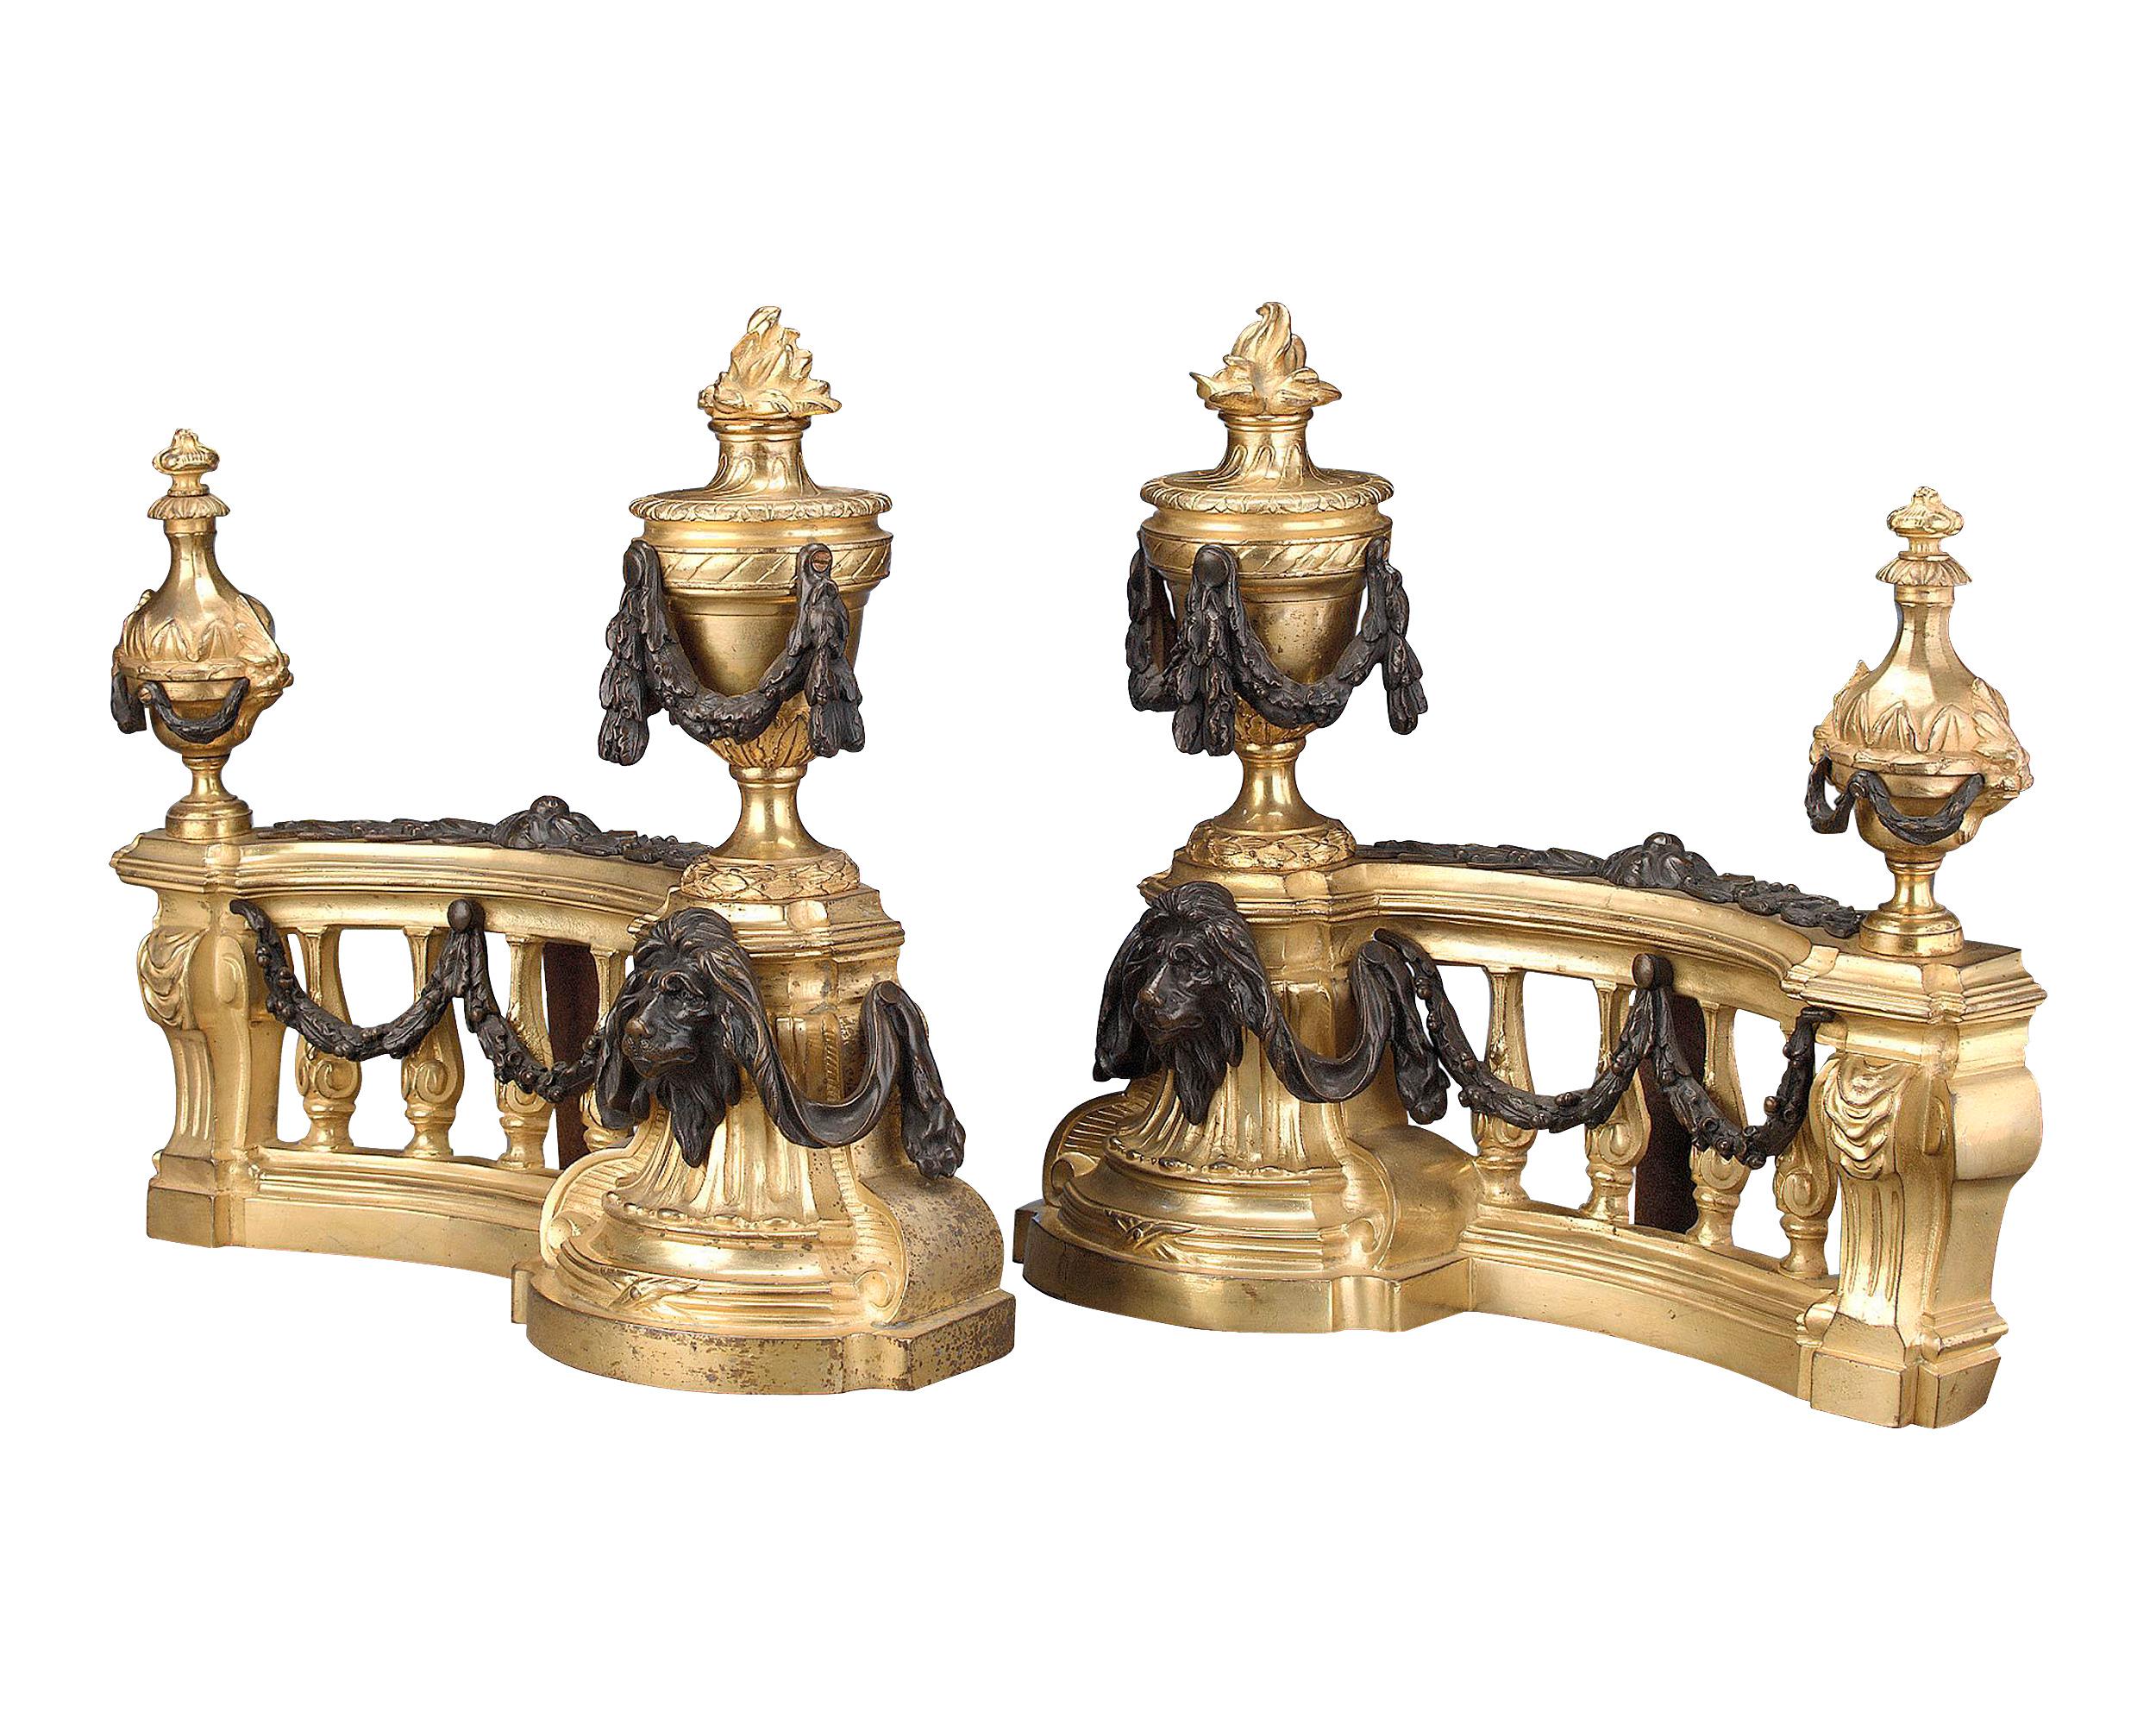 This superb pair of Louis XVI-style chenets, or andirons, is crafted of solid doré bronze and adorned with swags and lion heads of patinated bronze, circa 1840 15 1/2” wide x 14 1/2” high.